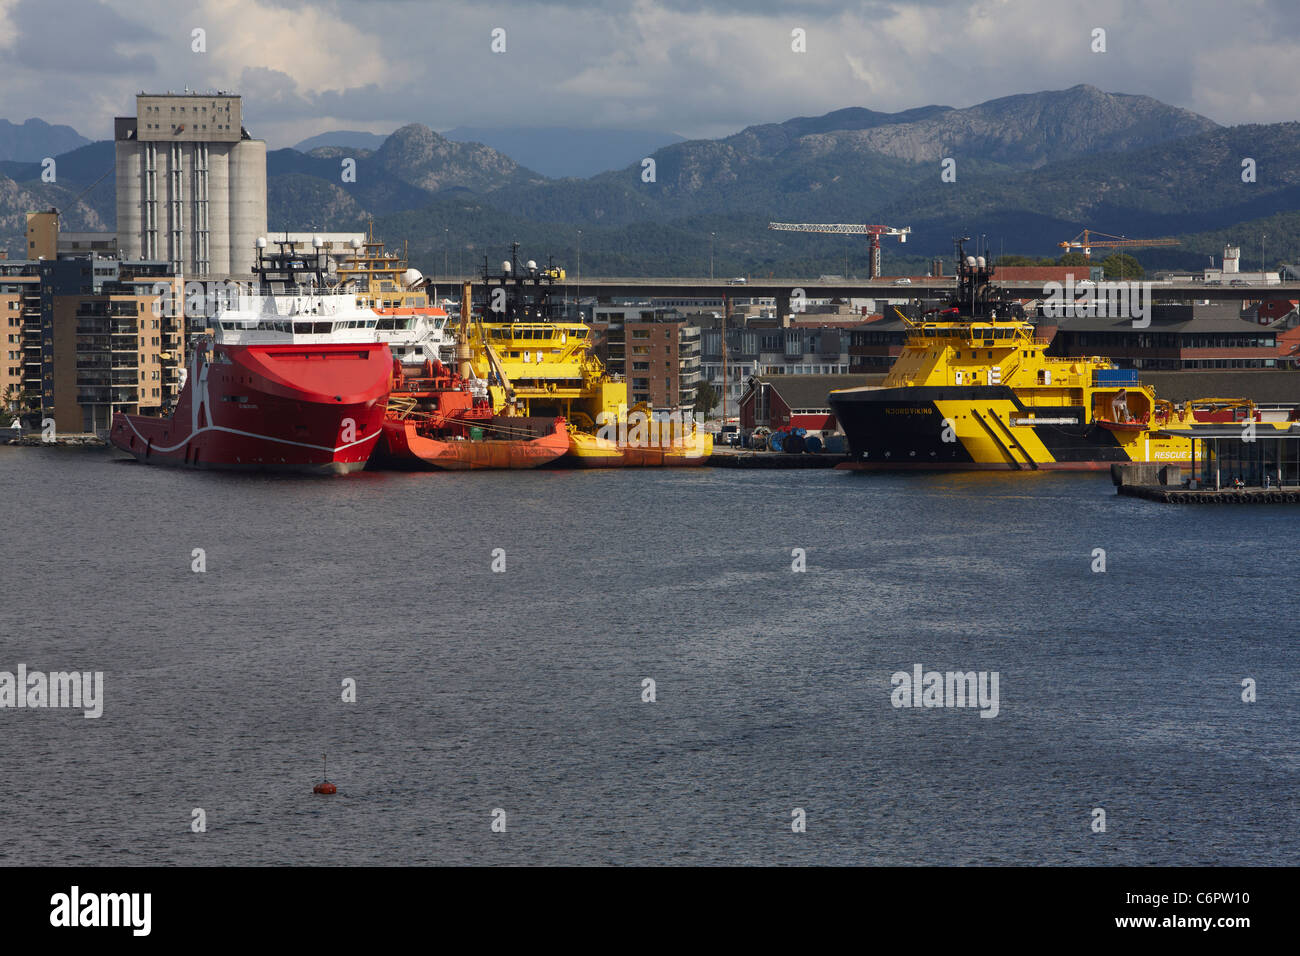 Anchor handling and offshore service vessels, including KL Saltfjord and Njord Viking, moored in the Port of Stavanger, Norway. Stock Photo